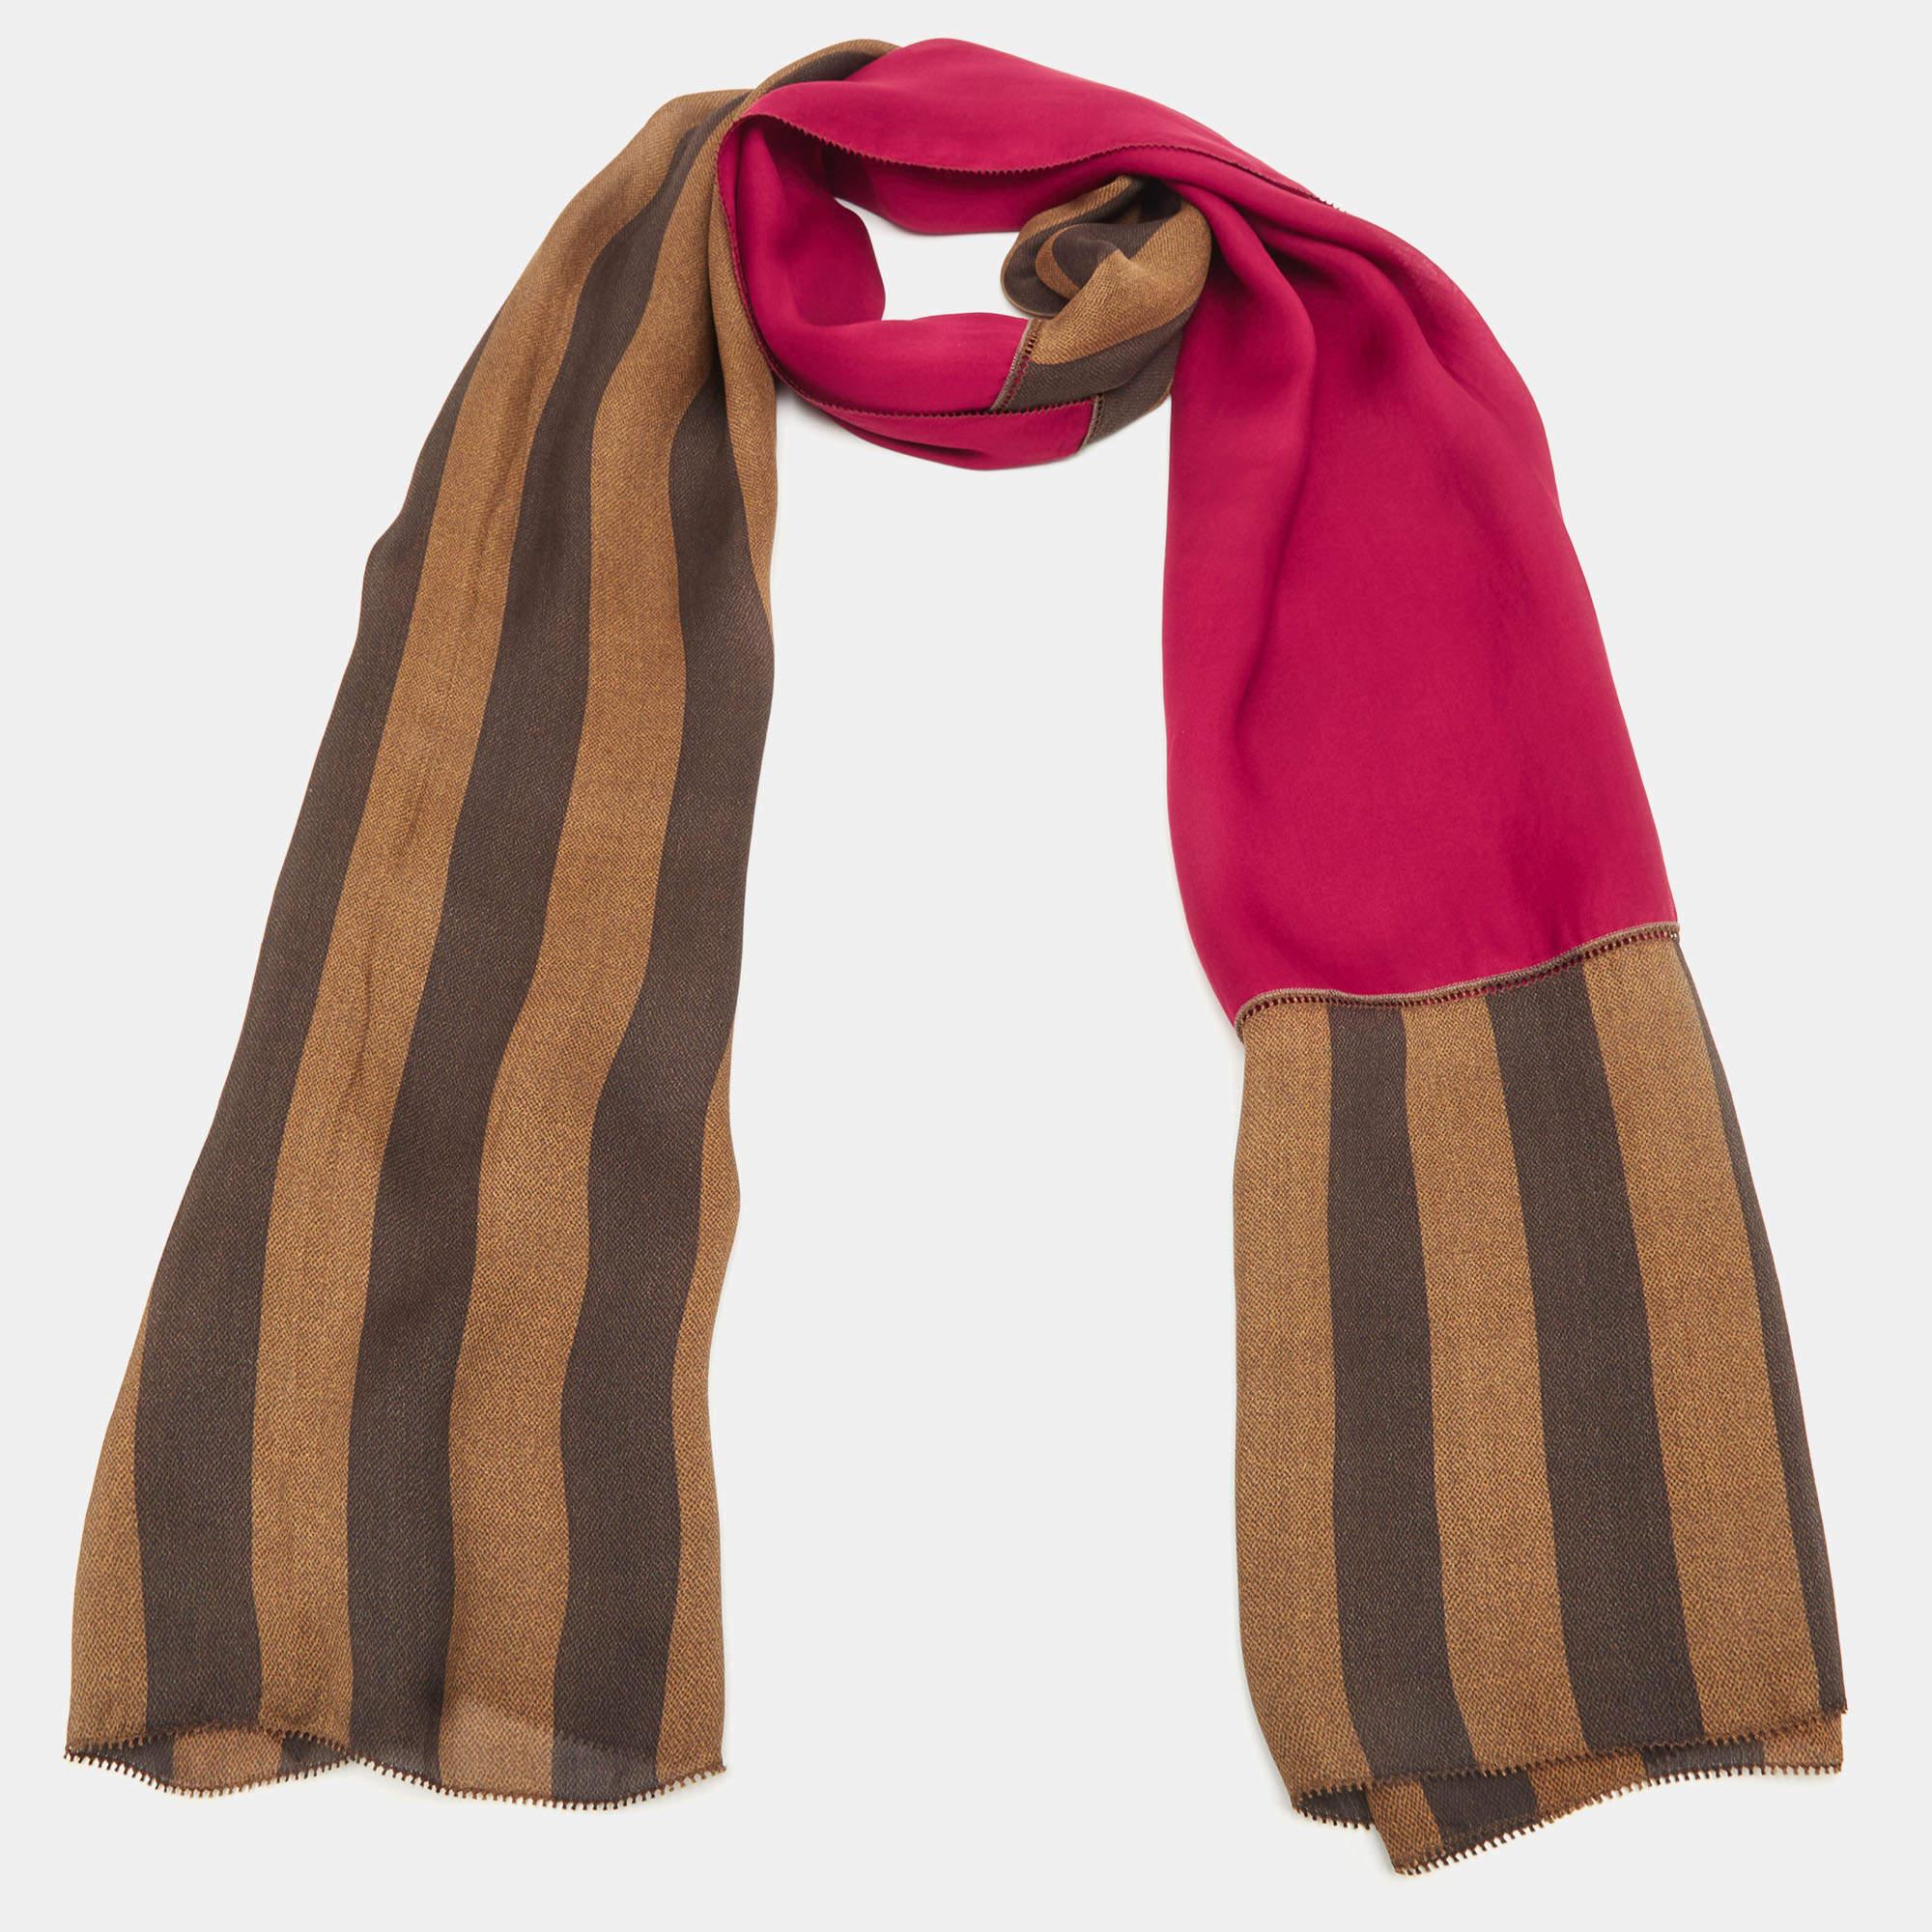 Pick this scarf for an instantly chic update. The scarf is made from silk and cut to a length that allows you to comfortably wrap it around your neck. The design involves pequin stripes and neatly hemmed edges.

